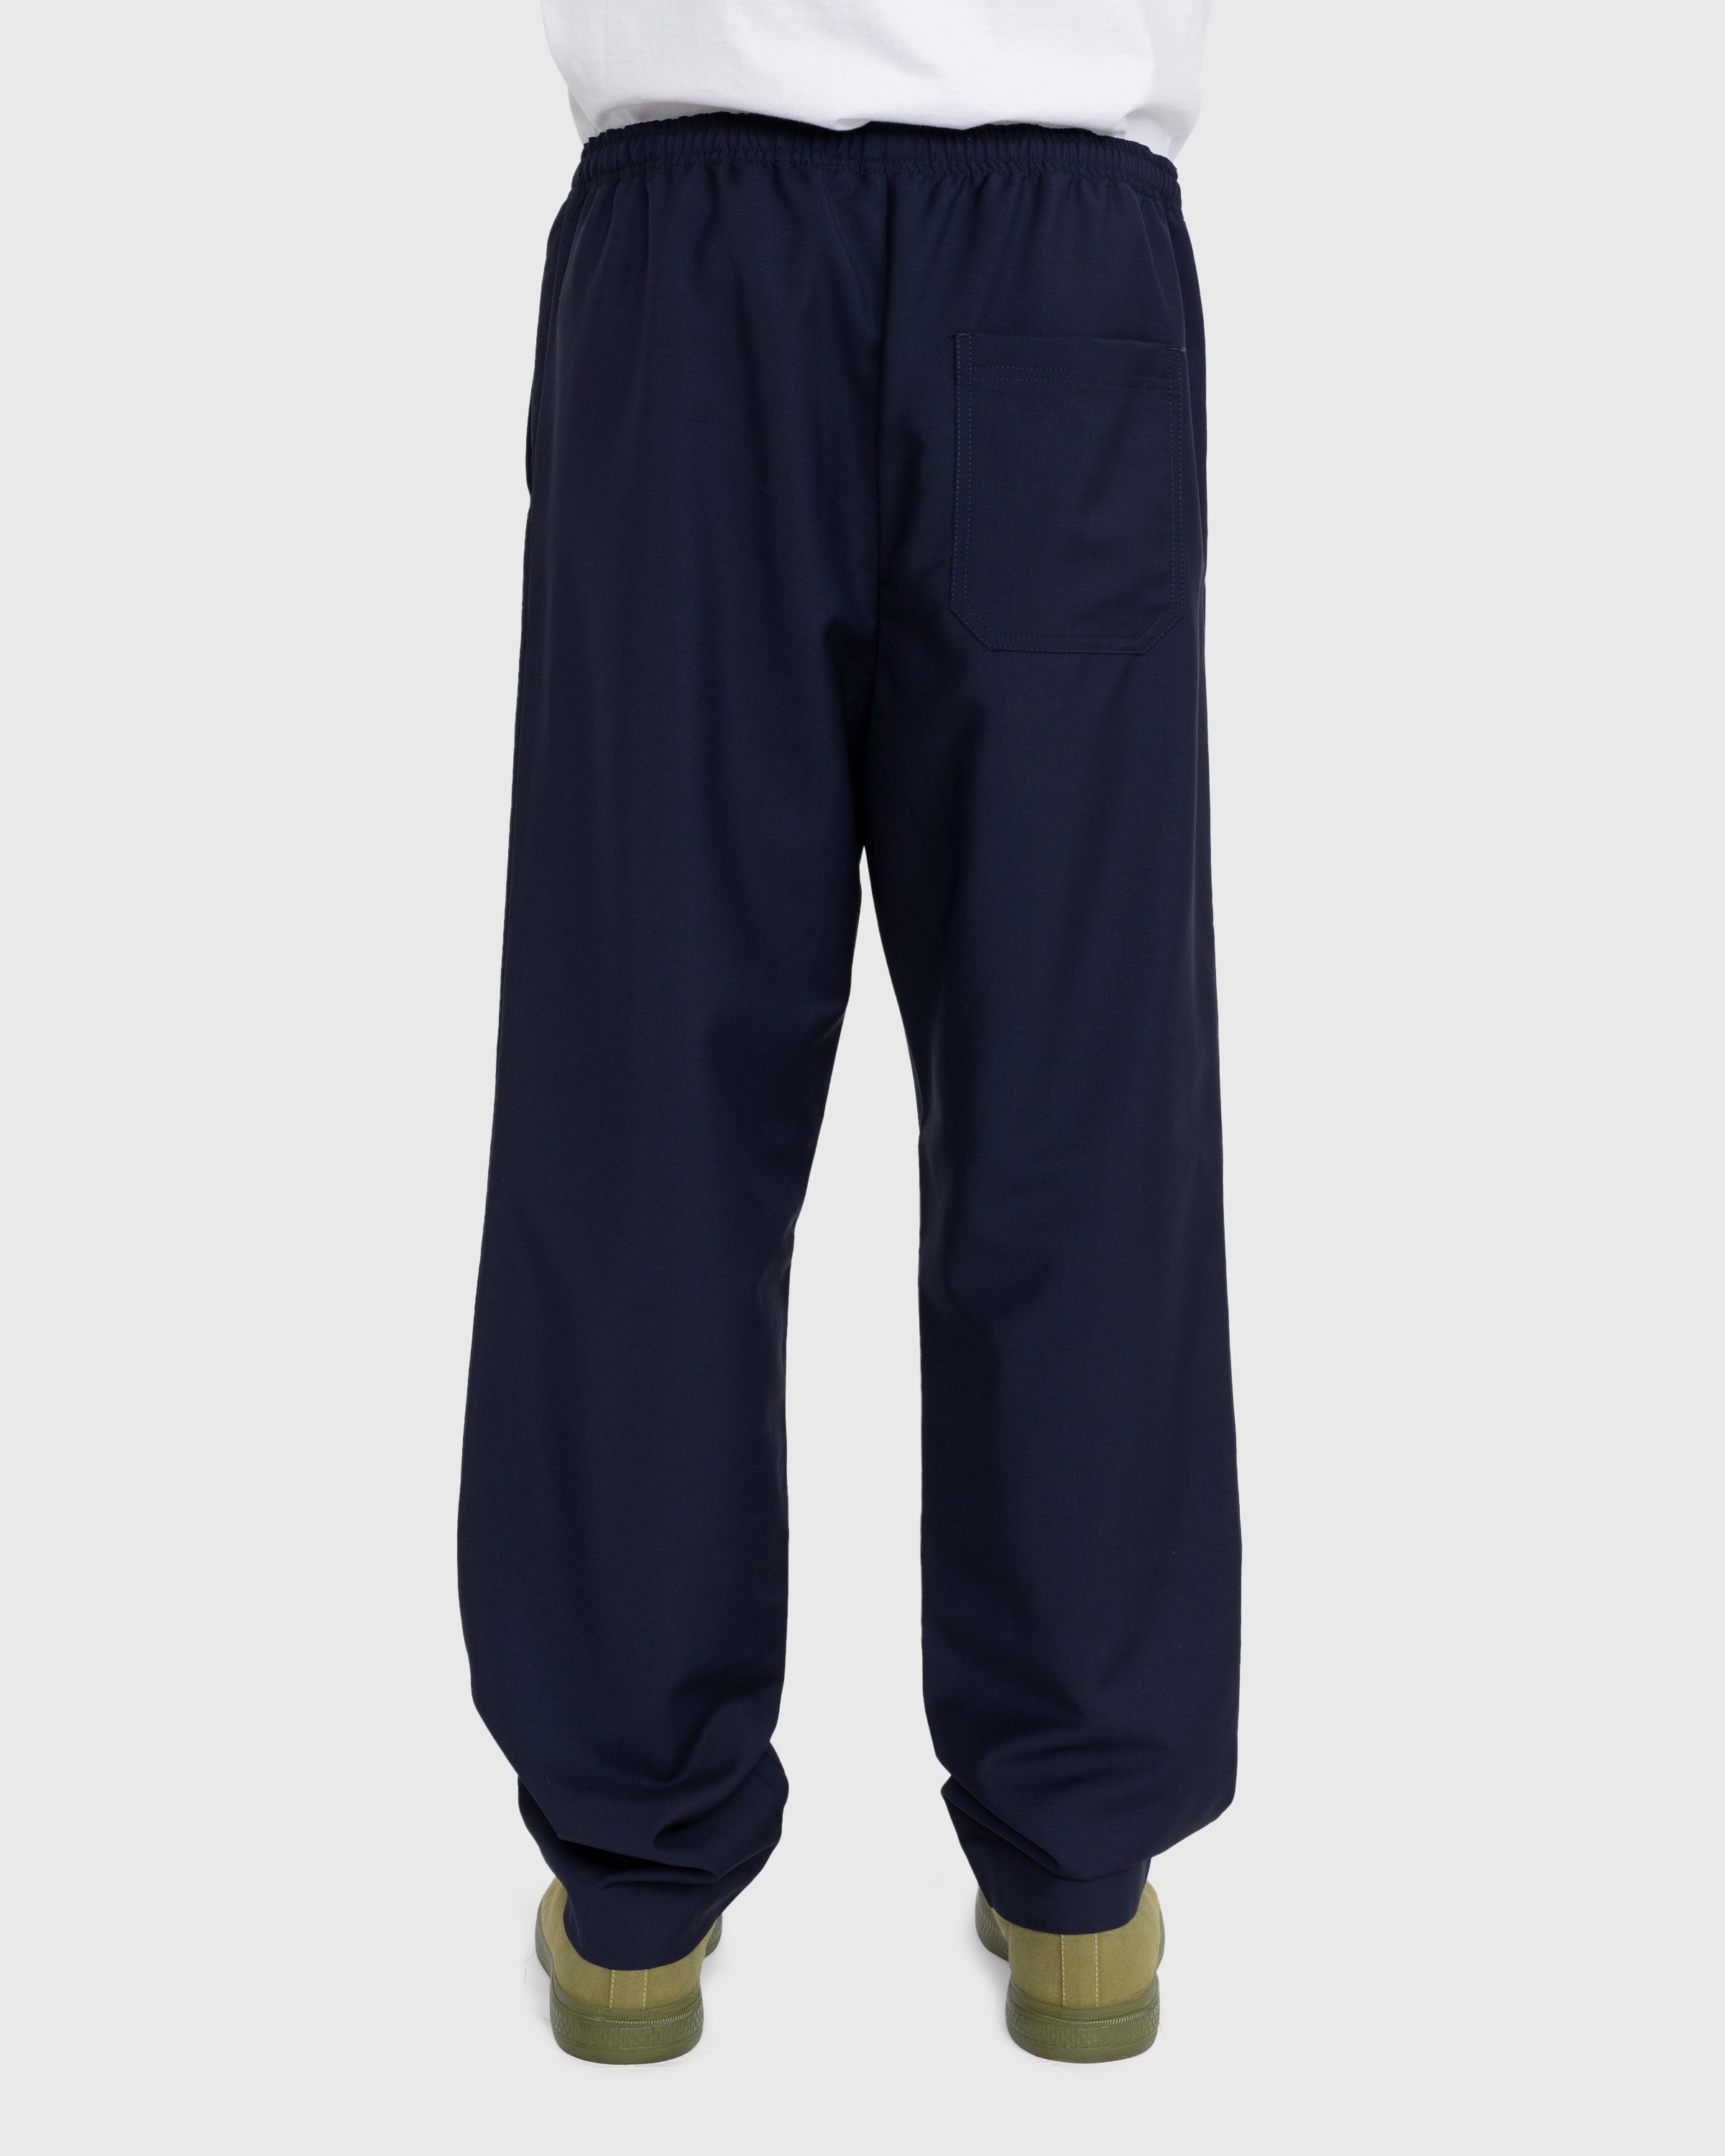 Acne Studios - Loose Fit Drawstring Trousers Blue - Clothing - Grey - Image 4